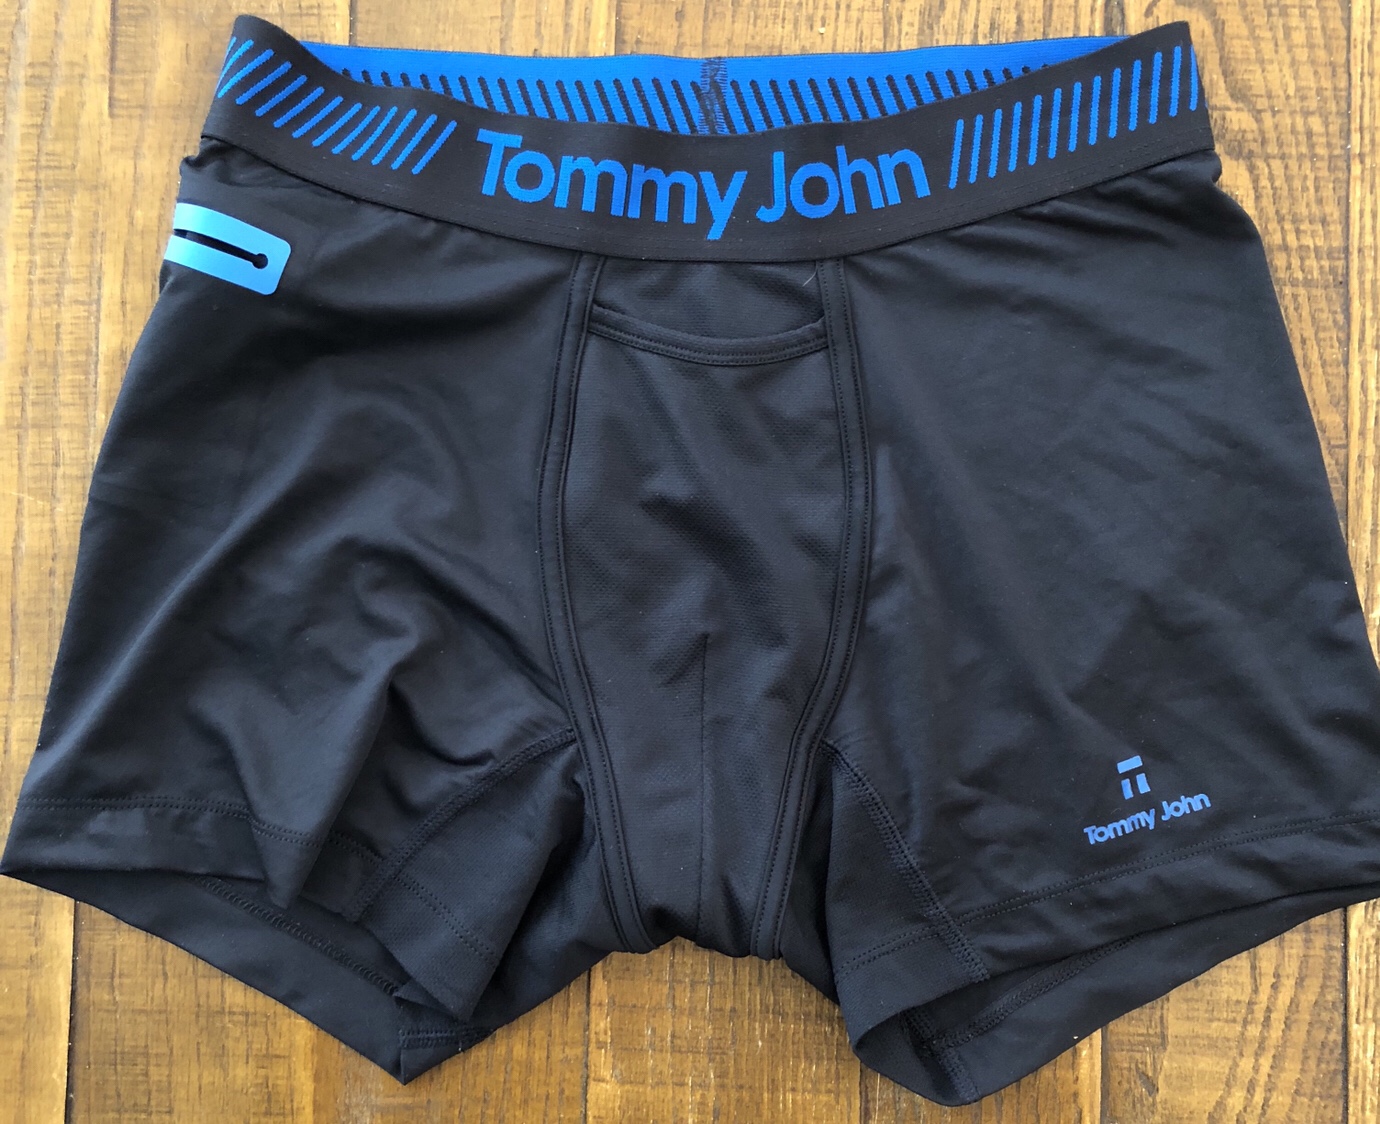 tommy john boxers review